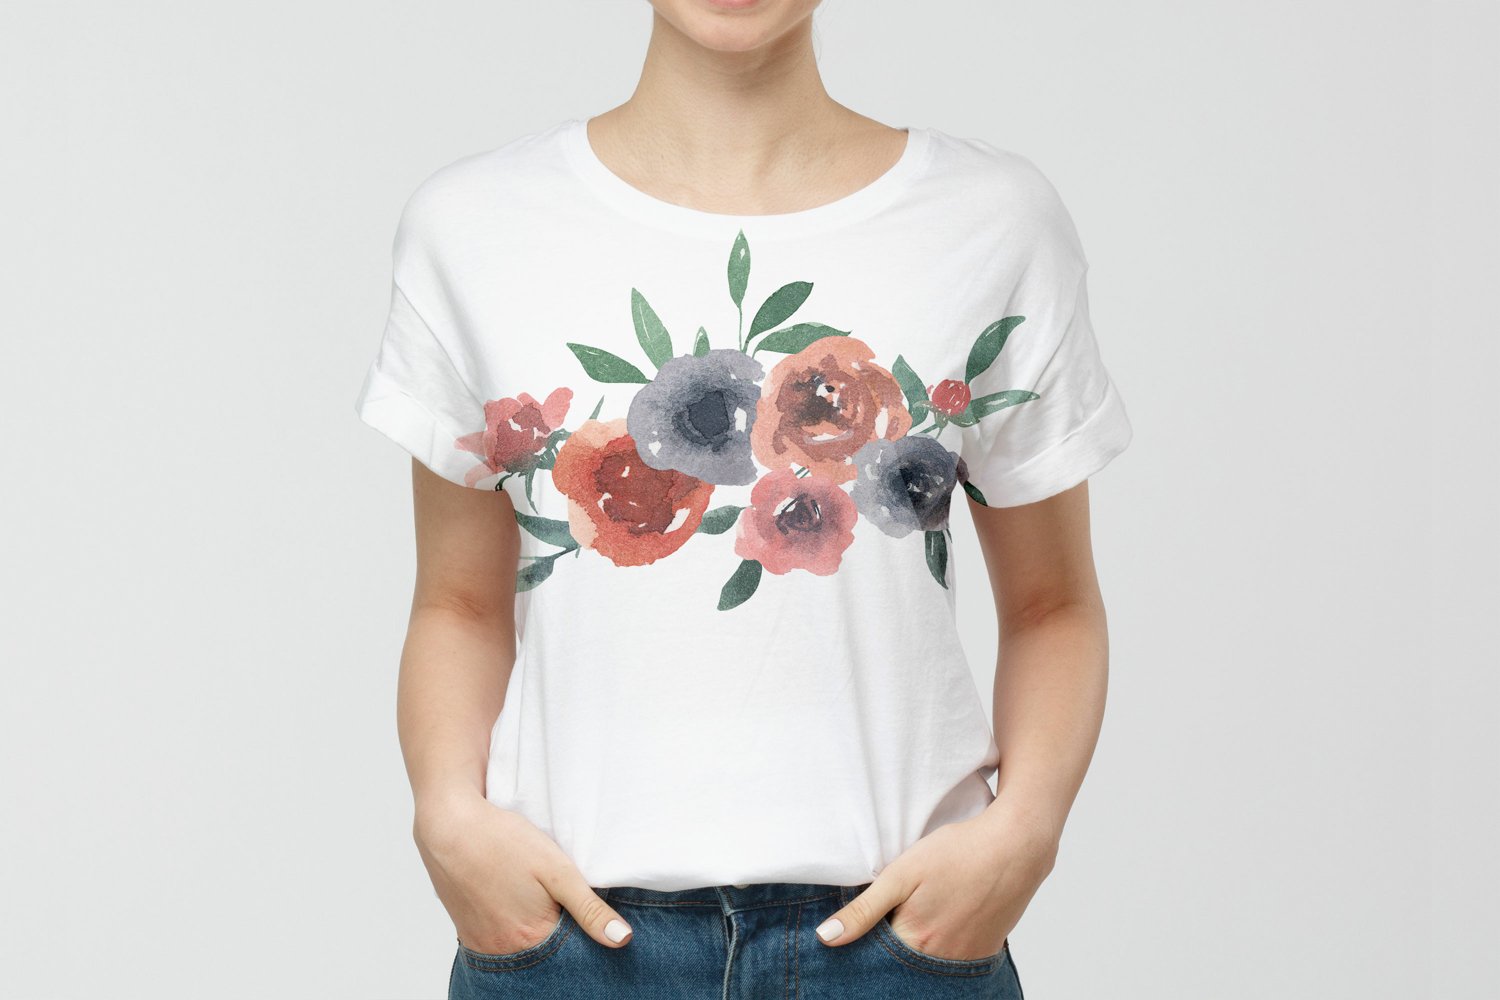 T-shirt design with floral elements.